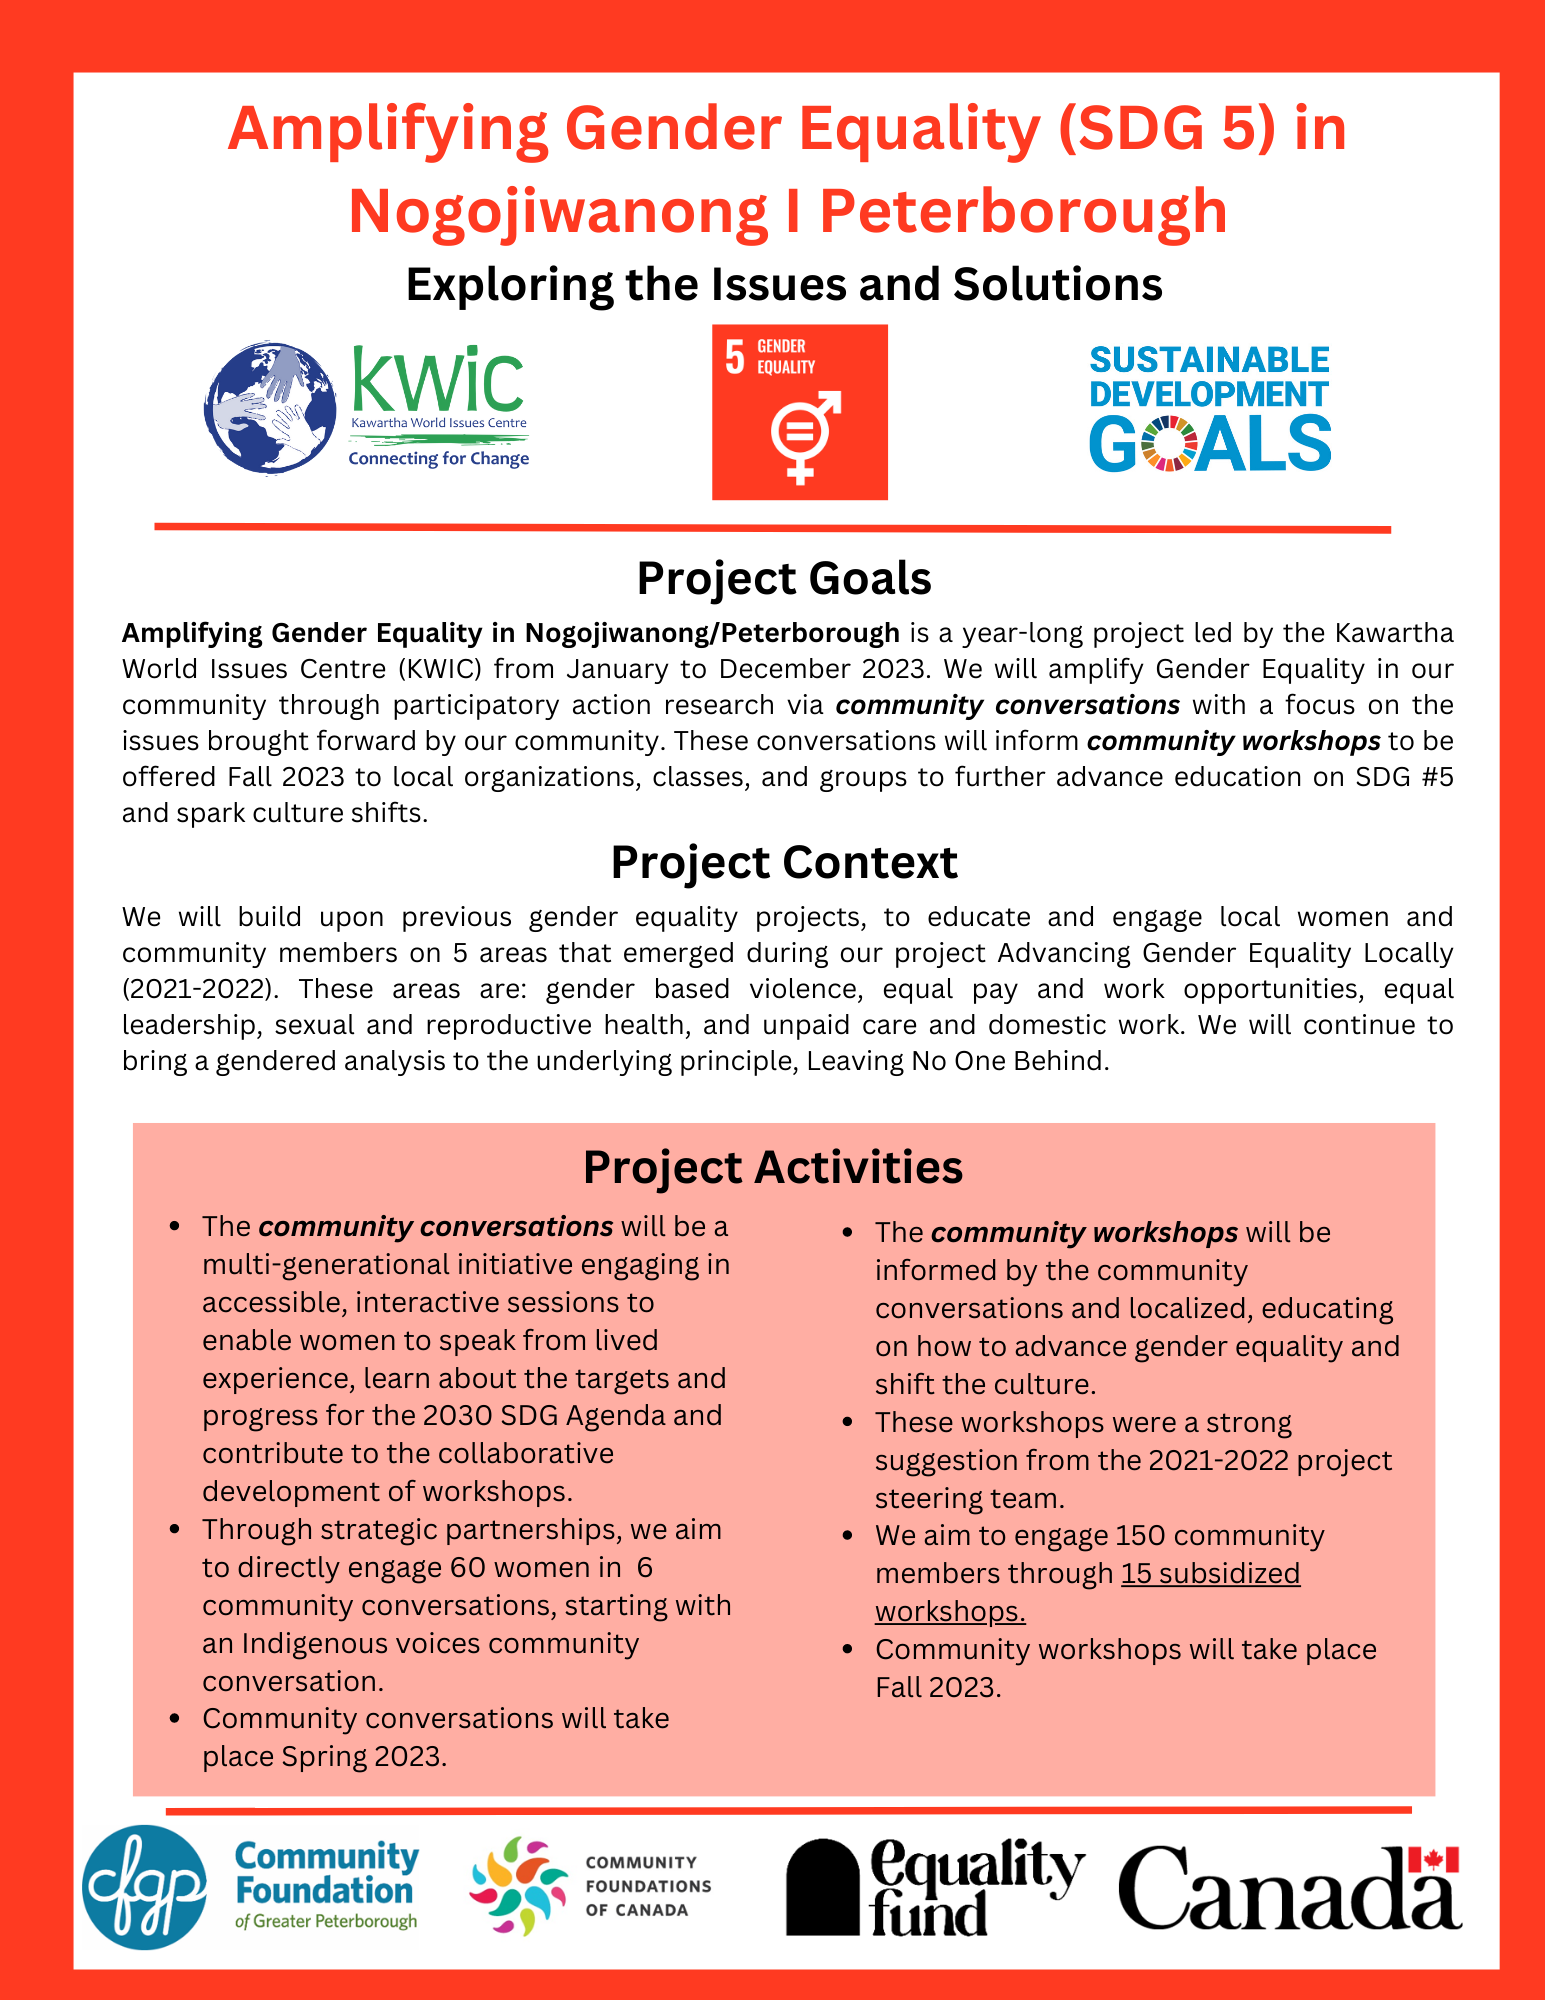 First page of a document explaining the project background information